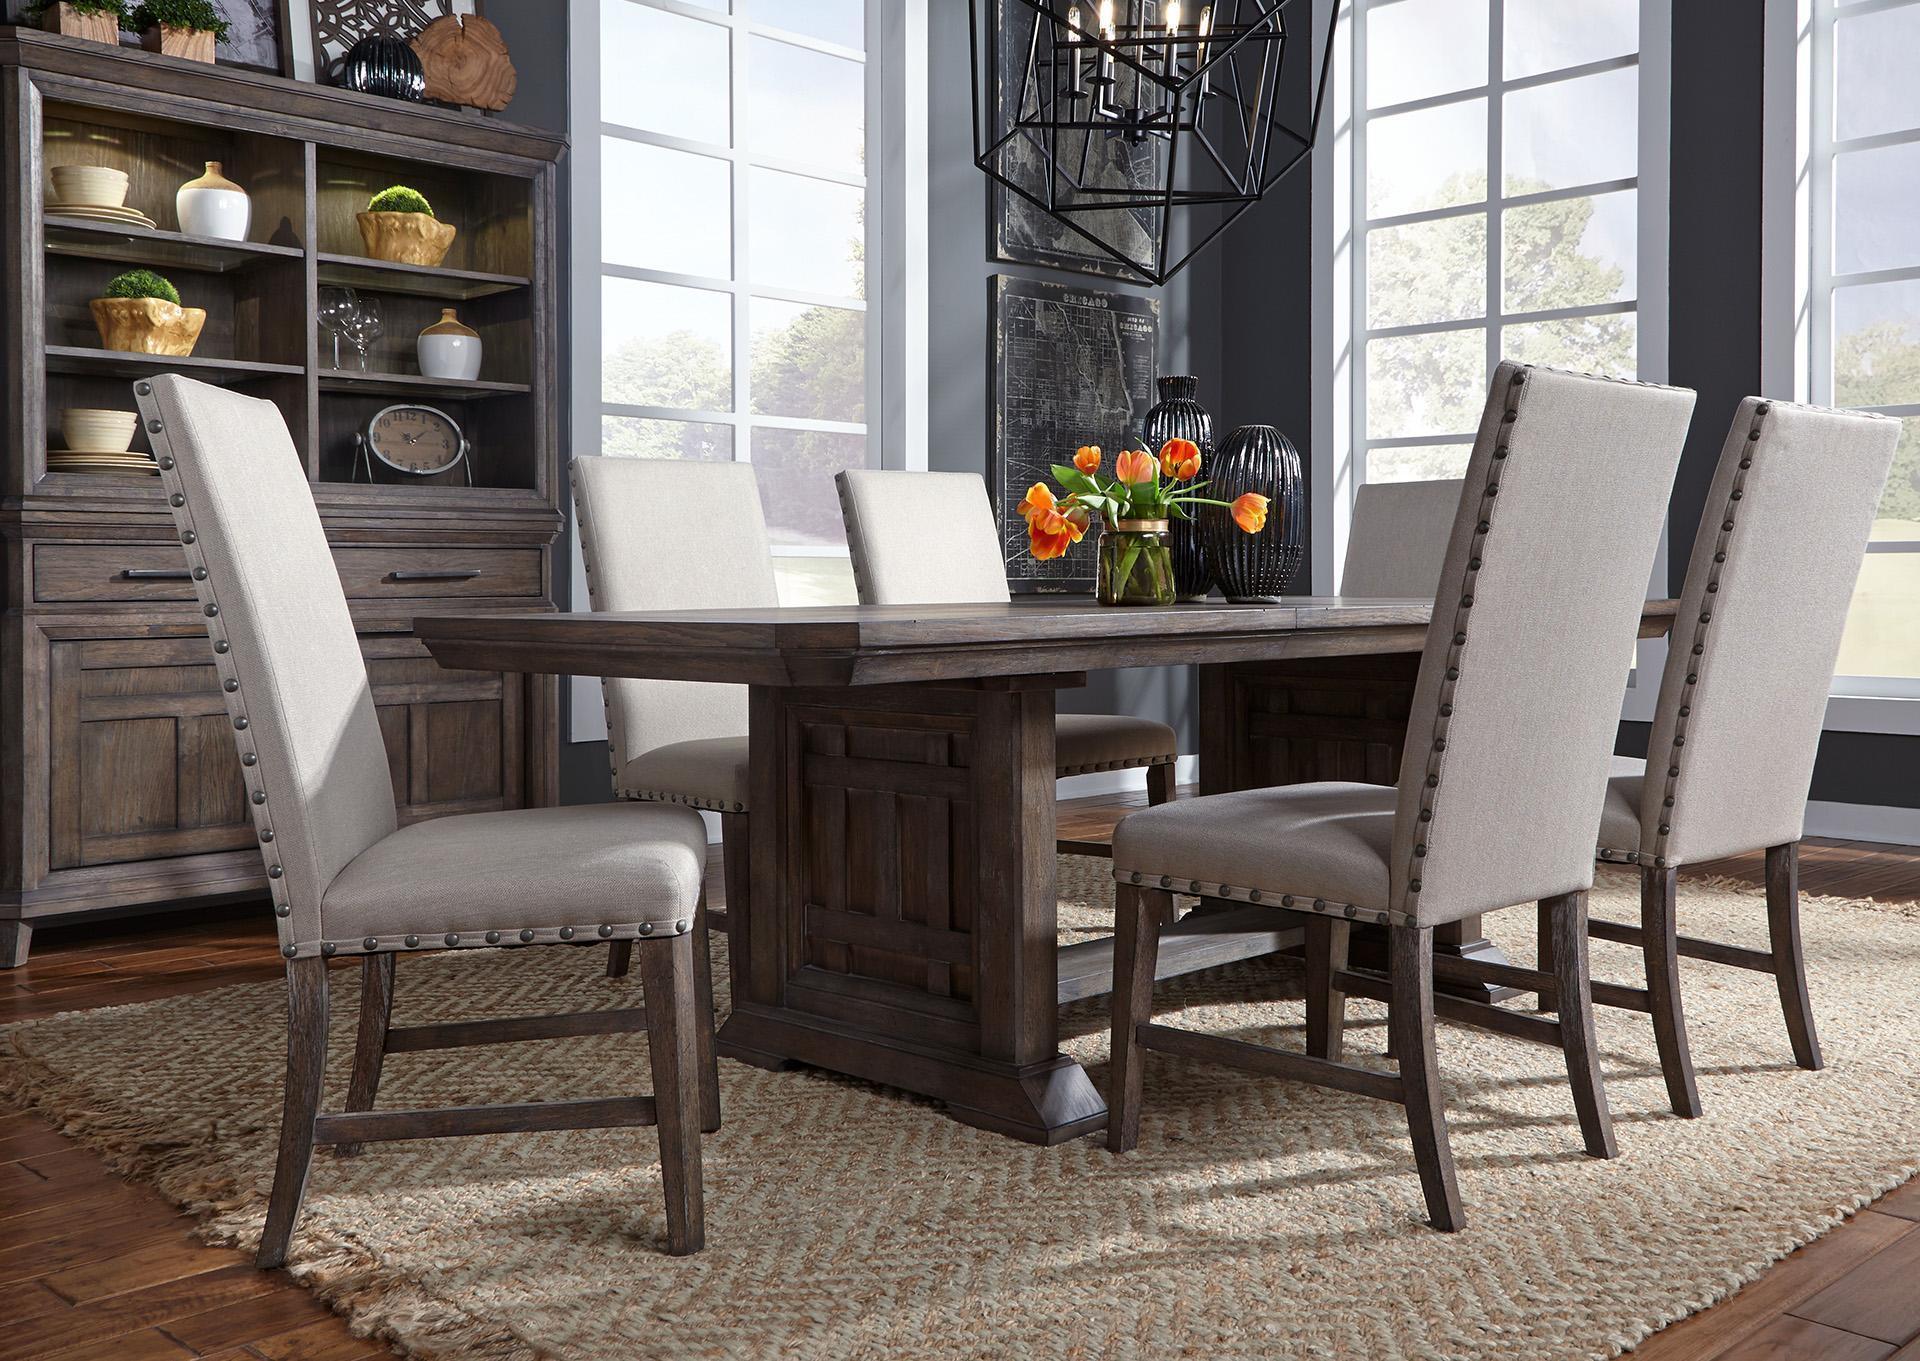 823-Trestle Table & 6 chairs,T-0124673 Total Home Package 2-27-24